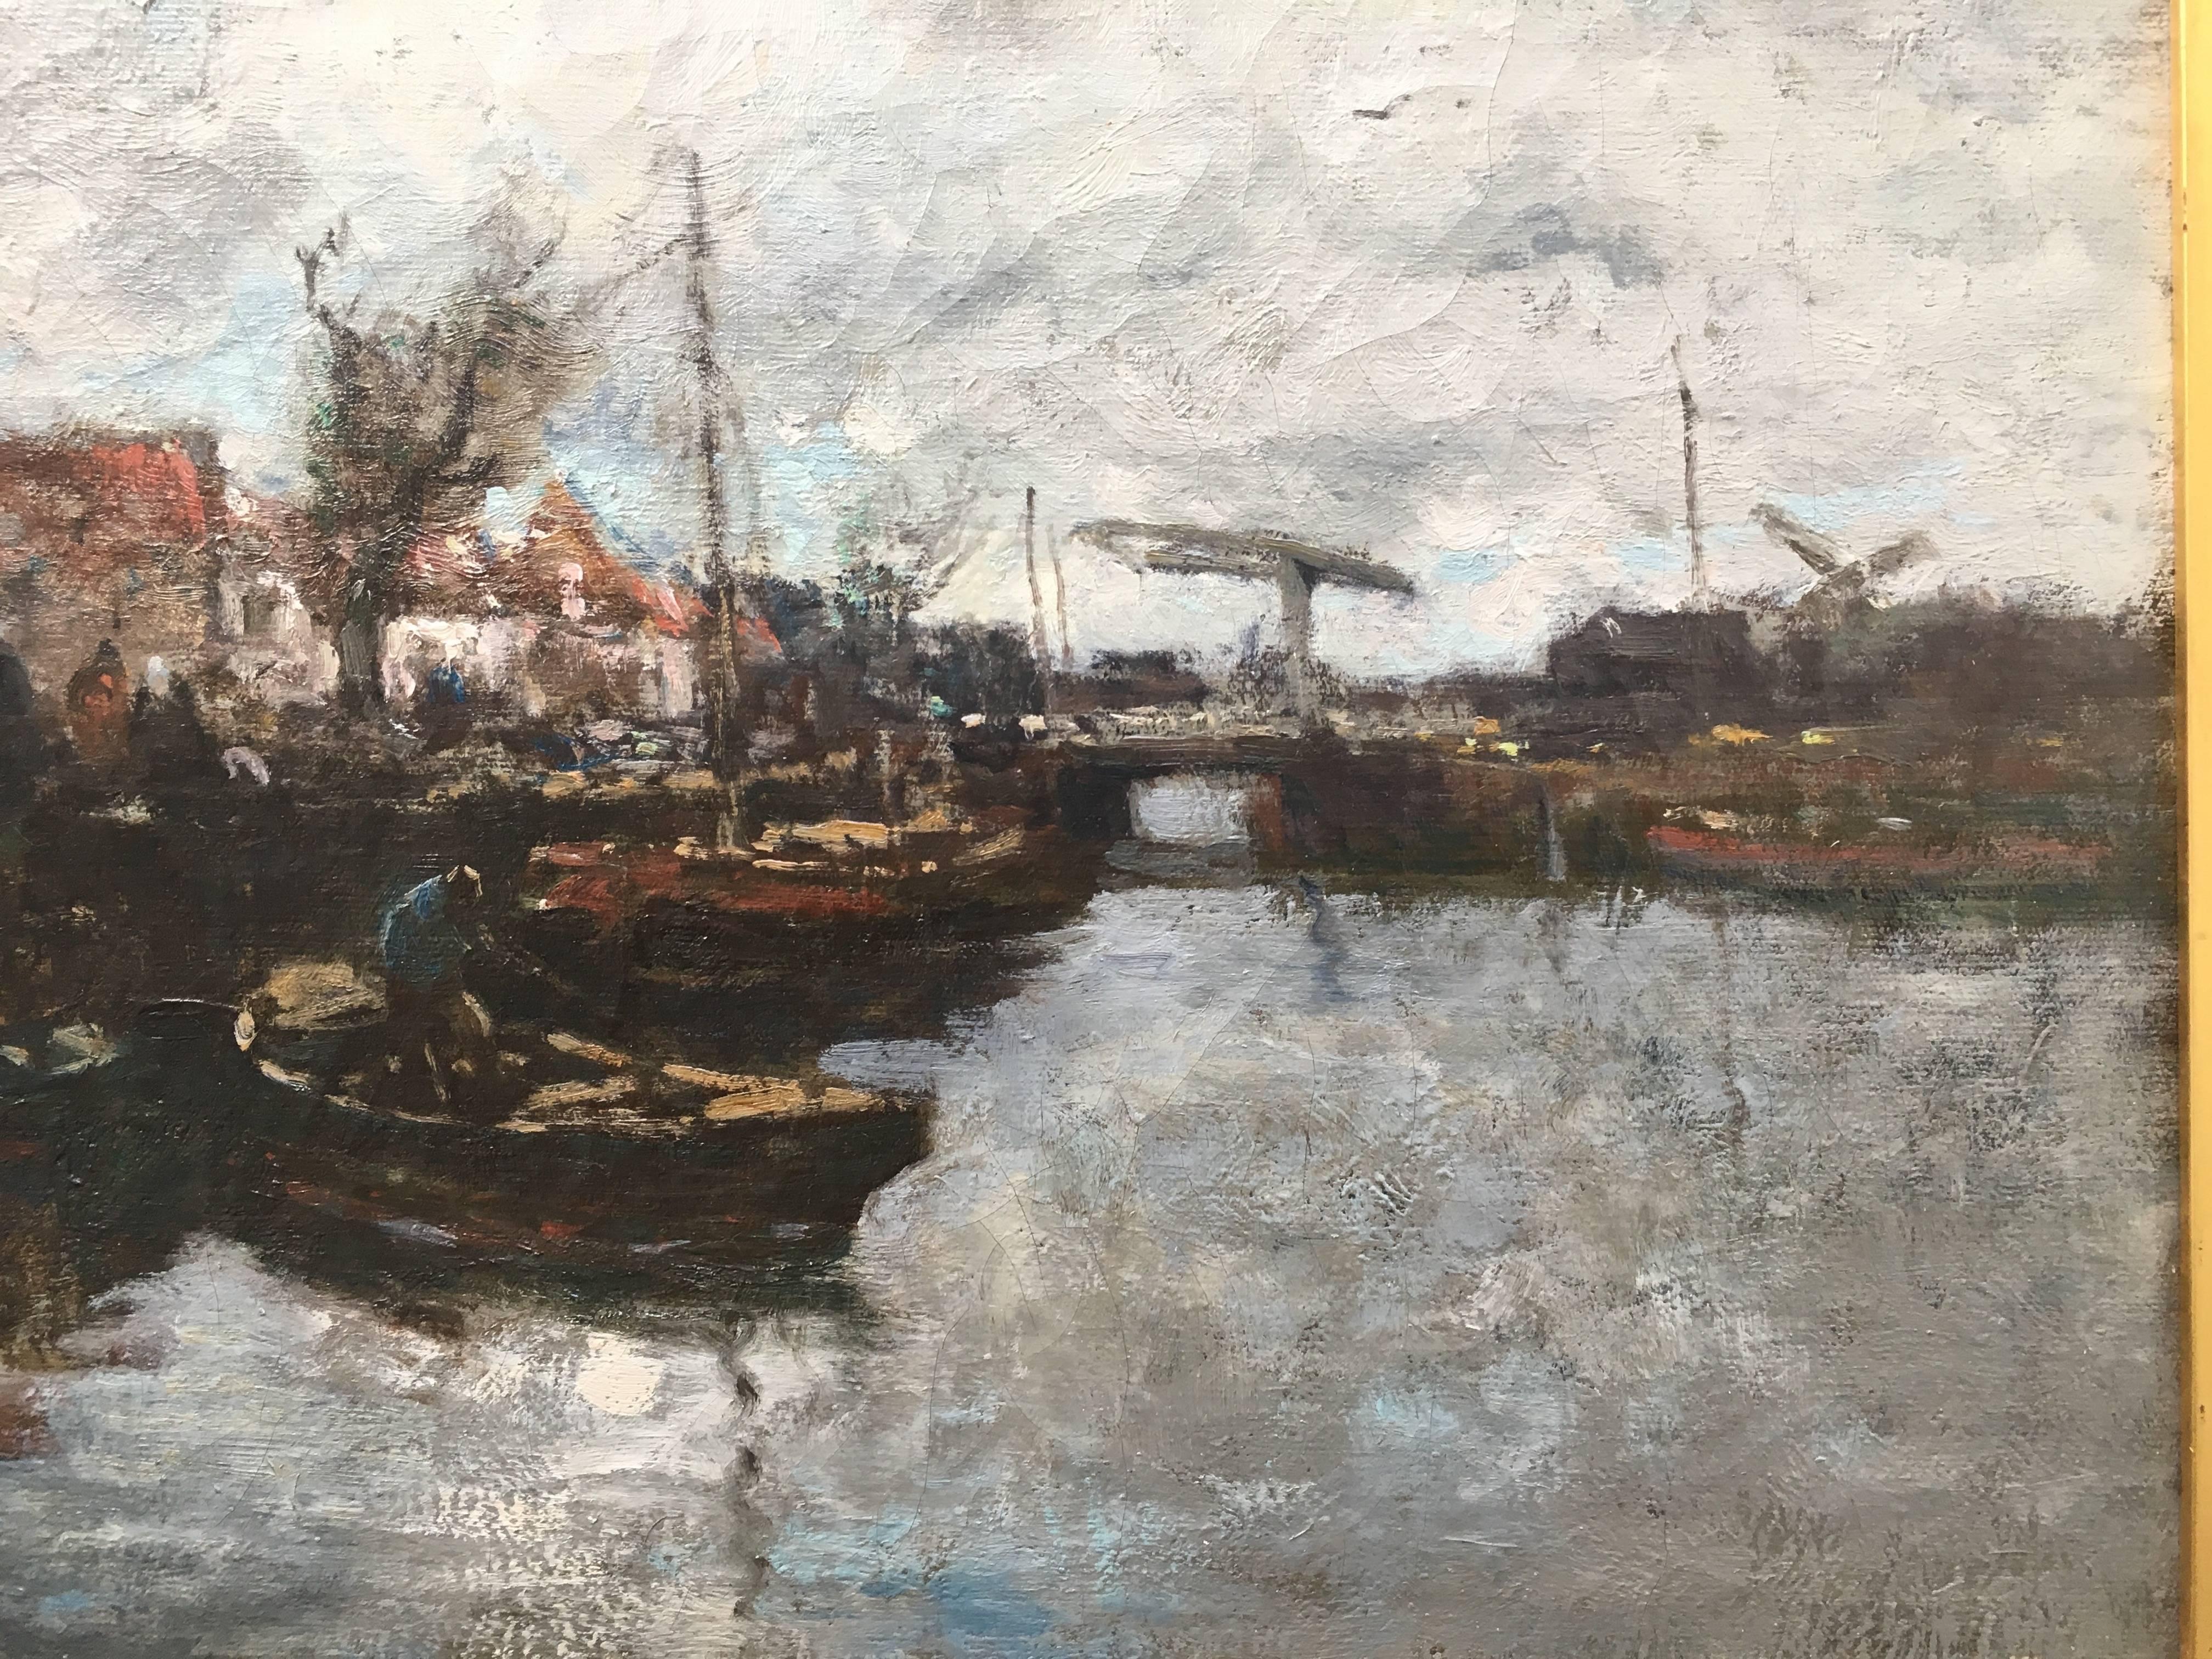 Boats in the Harbor - Brown Landscape Painting by William Ritschel